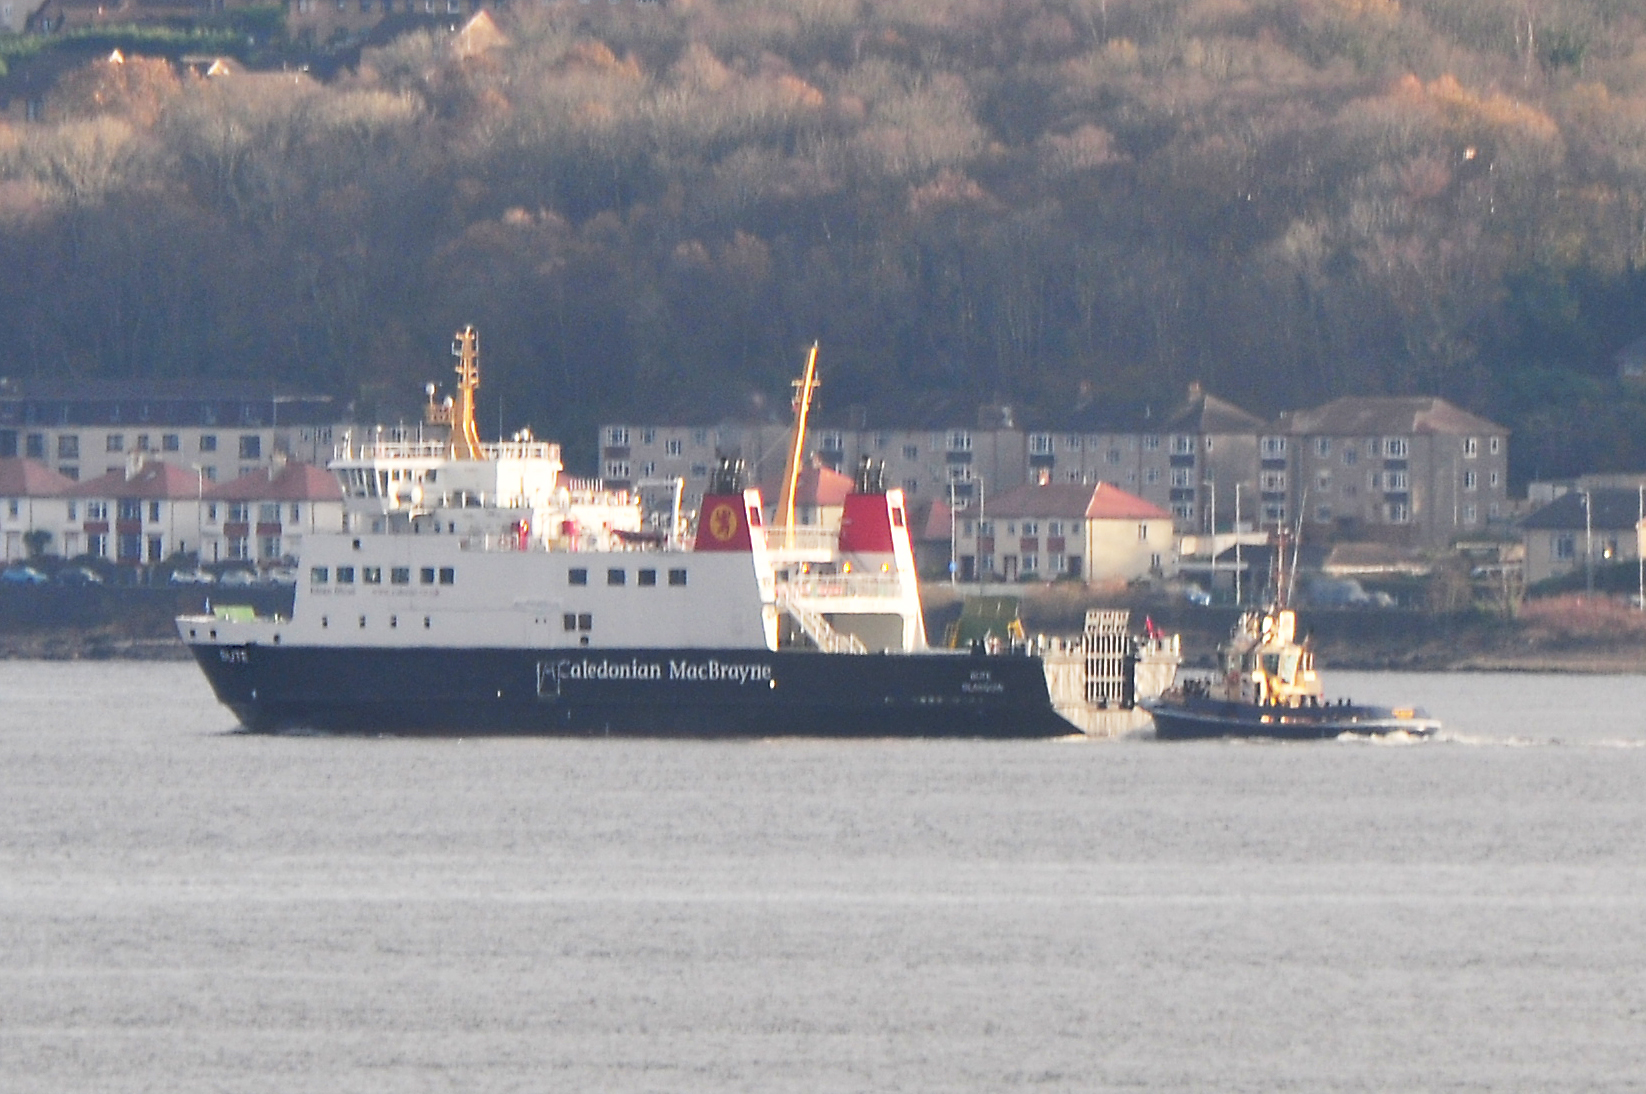 Further delays for MV Bute